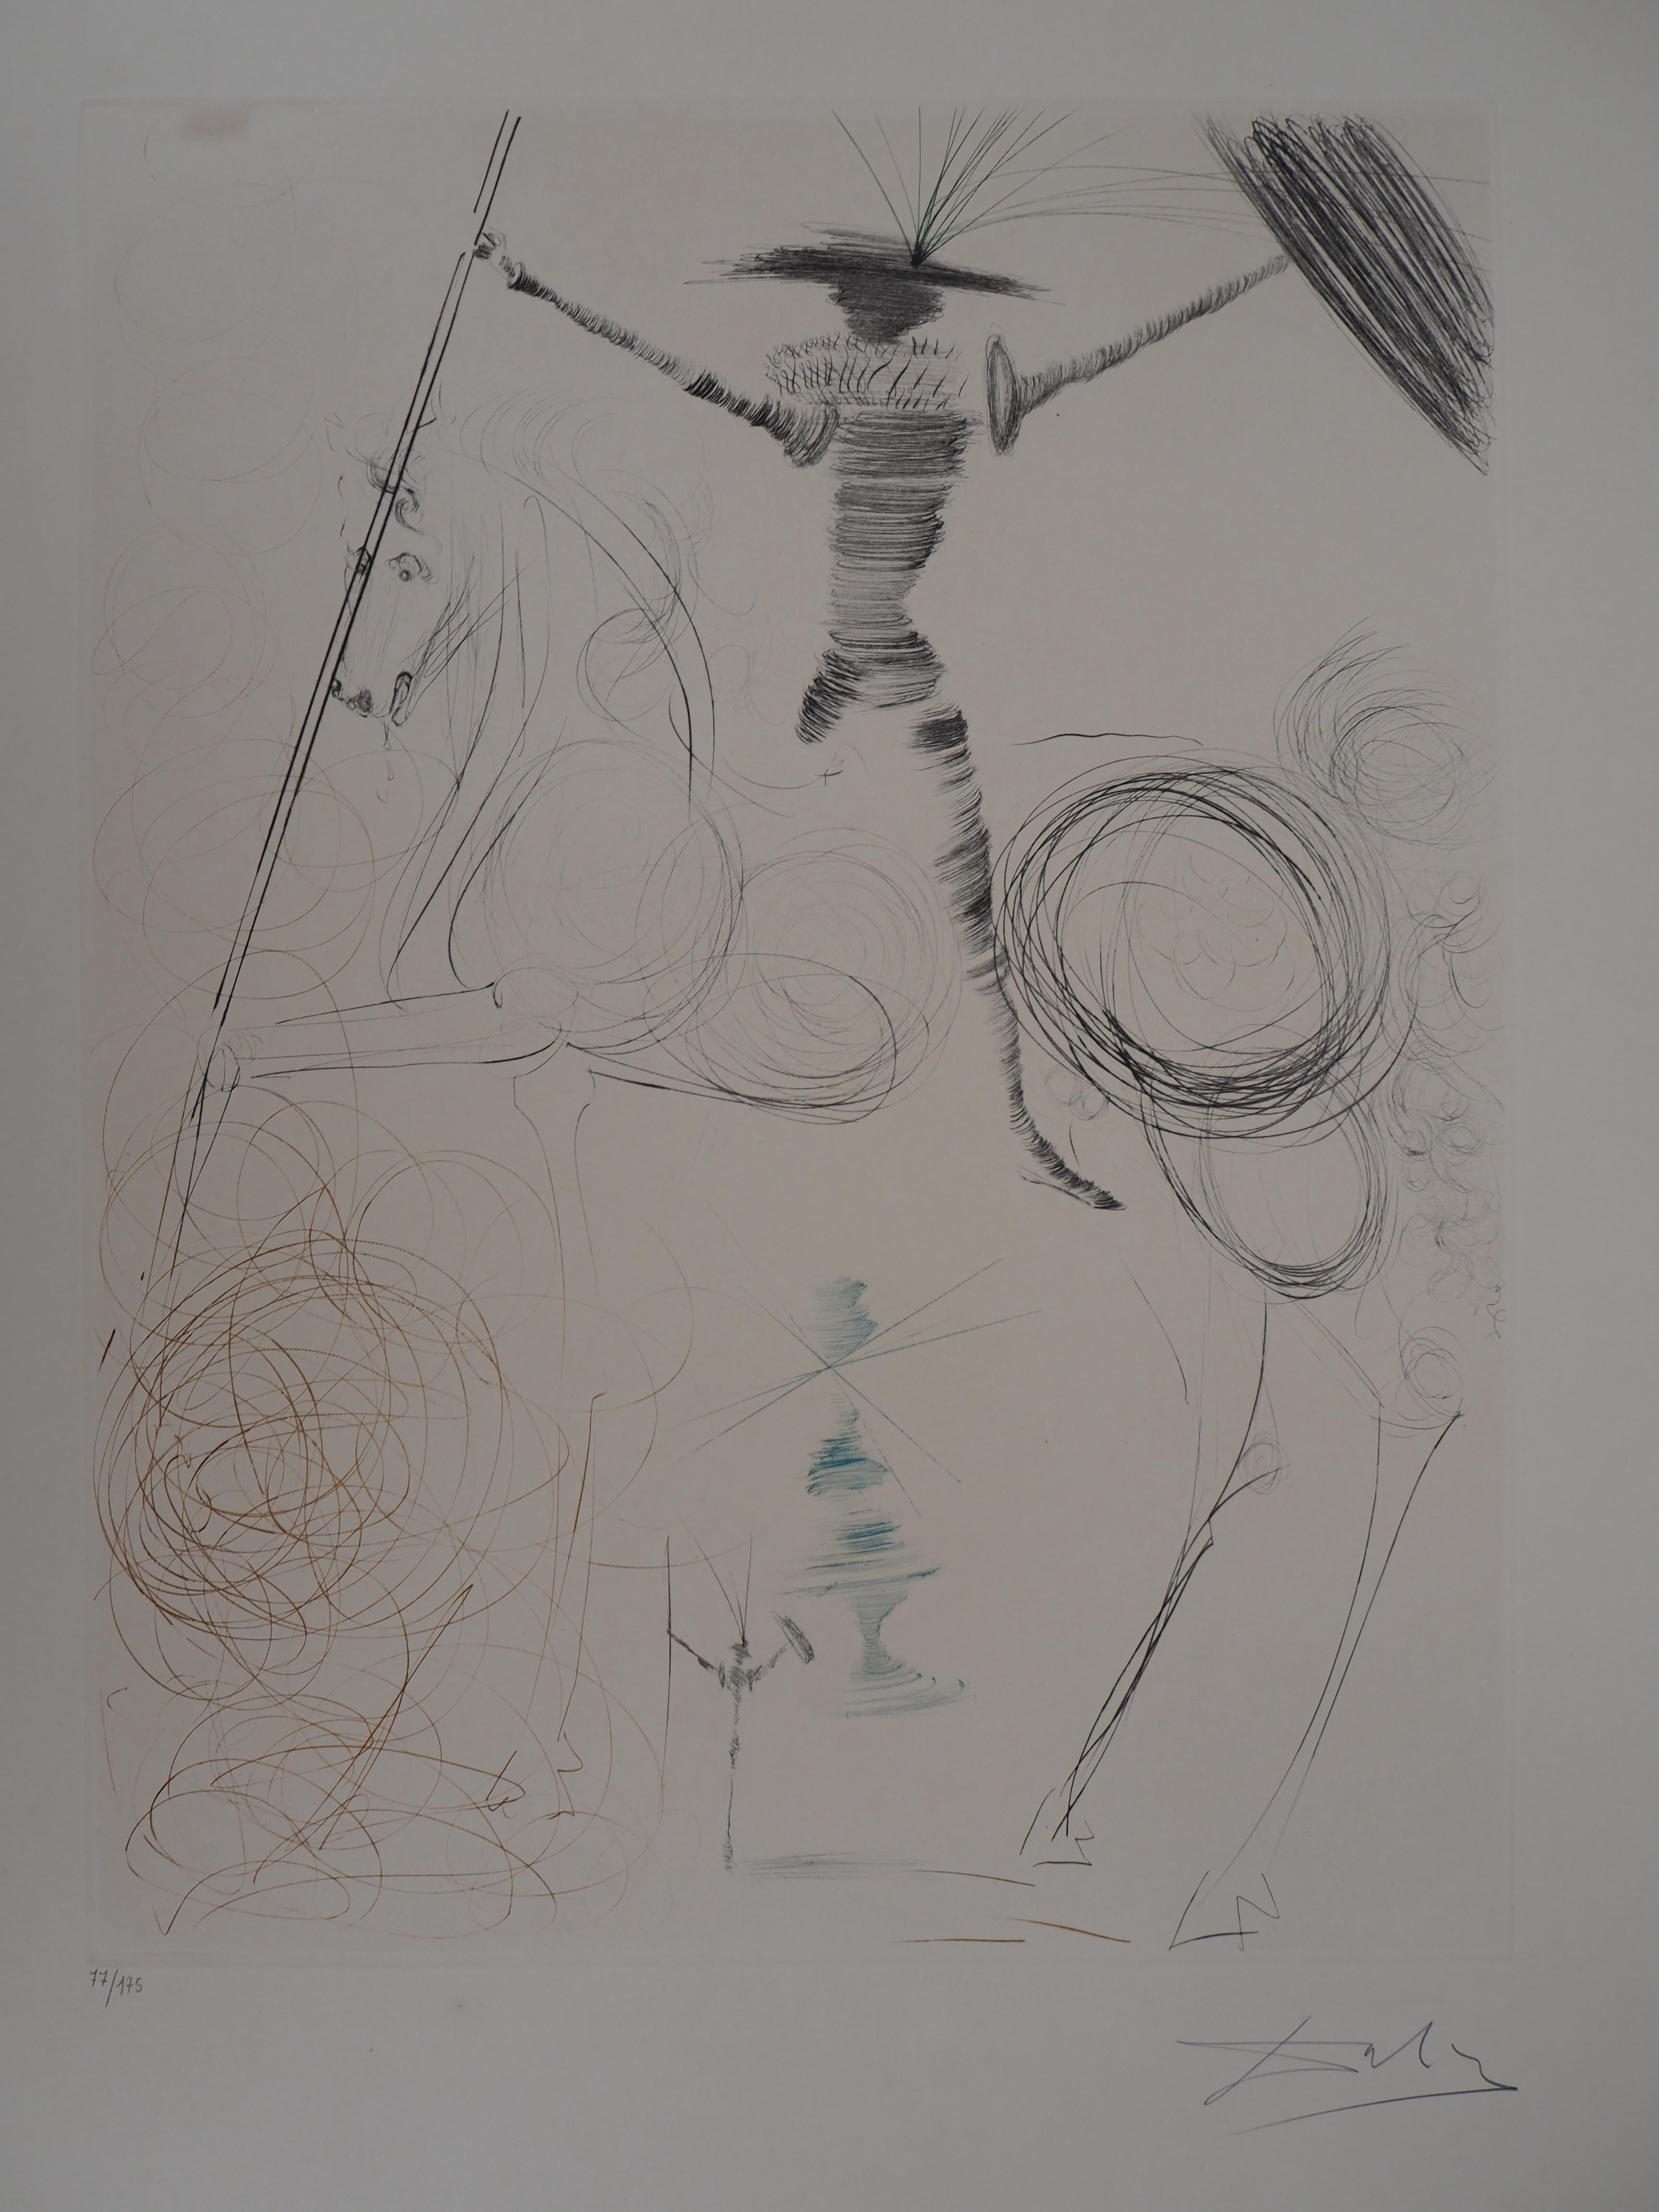 Don Quixote & Sancho Panza - Two original etchings, Handsigned (#Field 71-7) - Print by Salvador Dalí